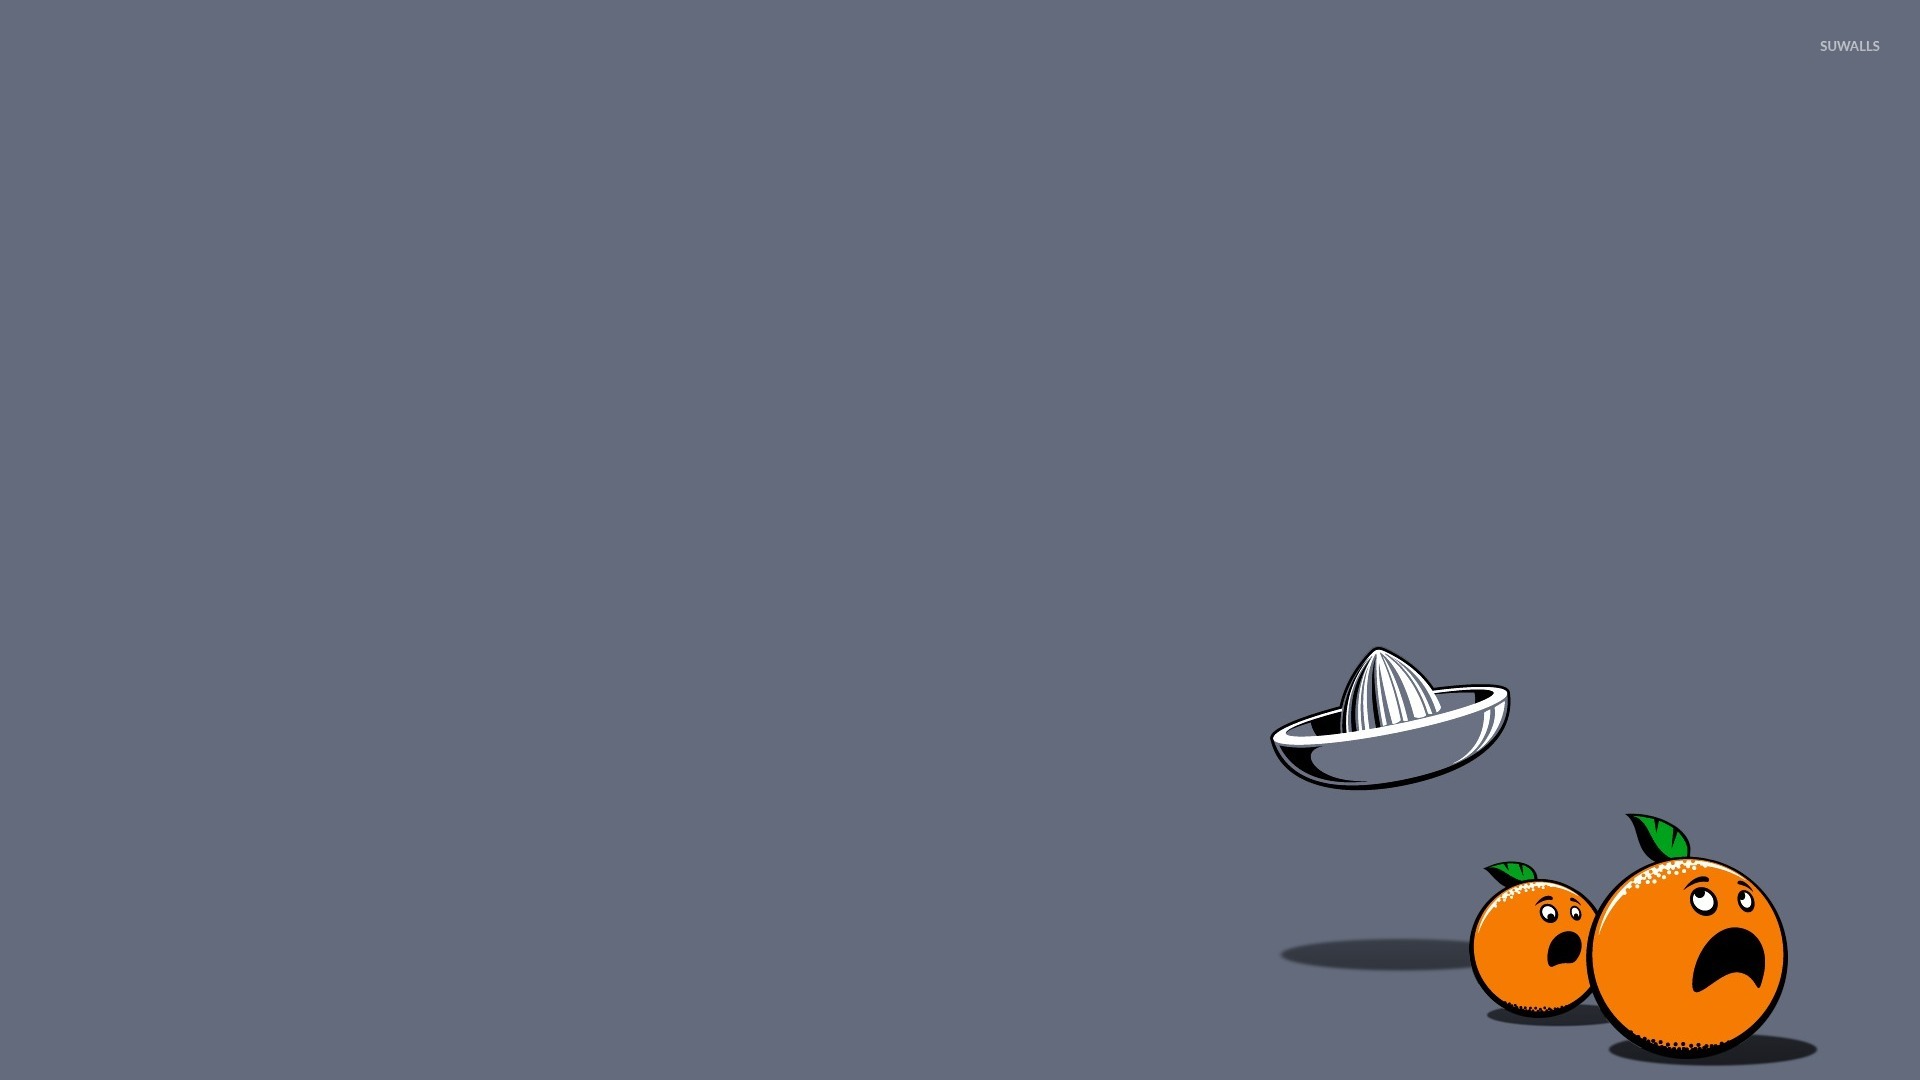 Oranges running from the squeezer wallpaper - Funny wallpapers - #49483